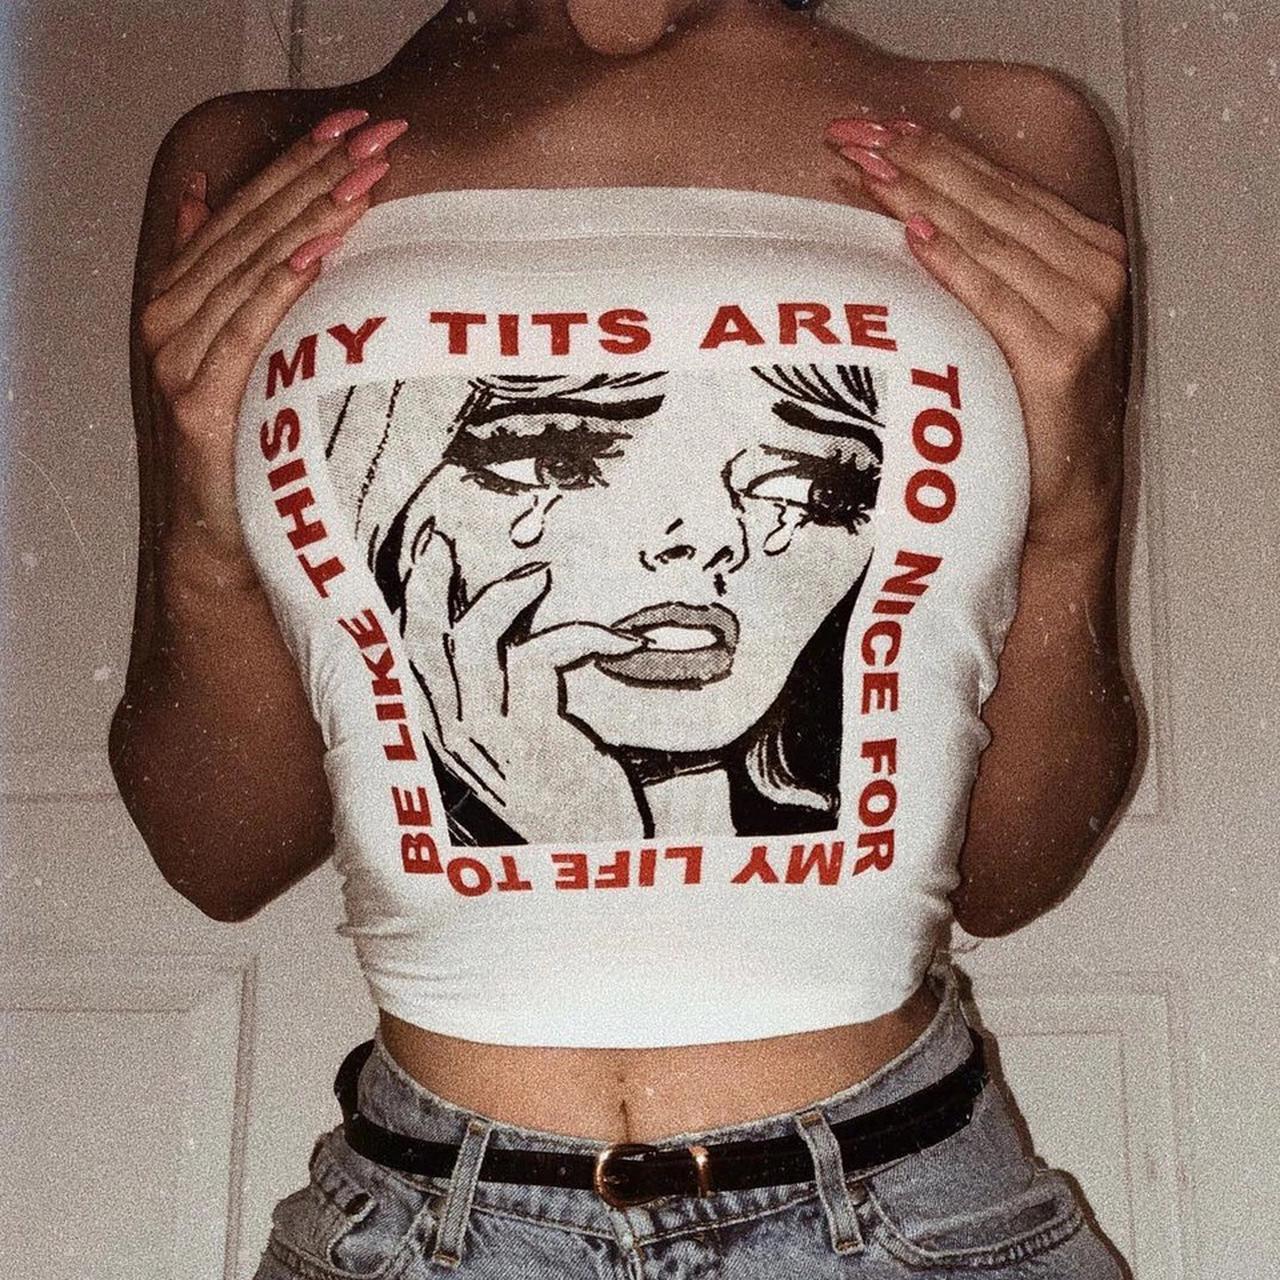 My tits are too nice for m life to be like this” - Depop